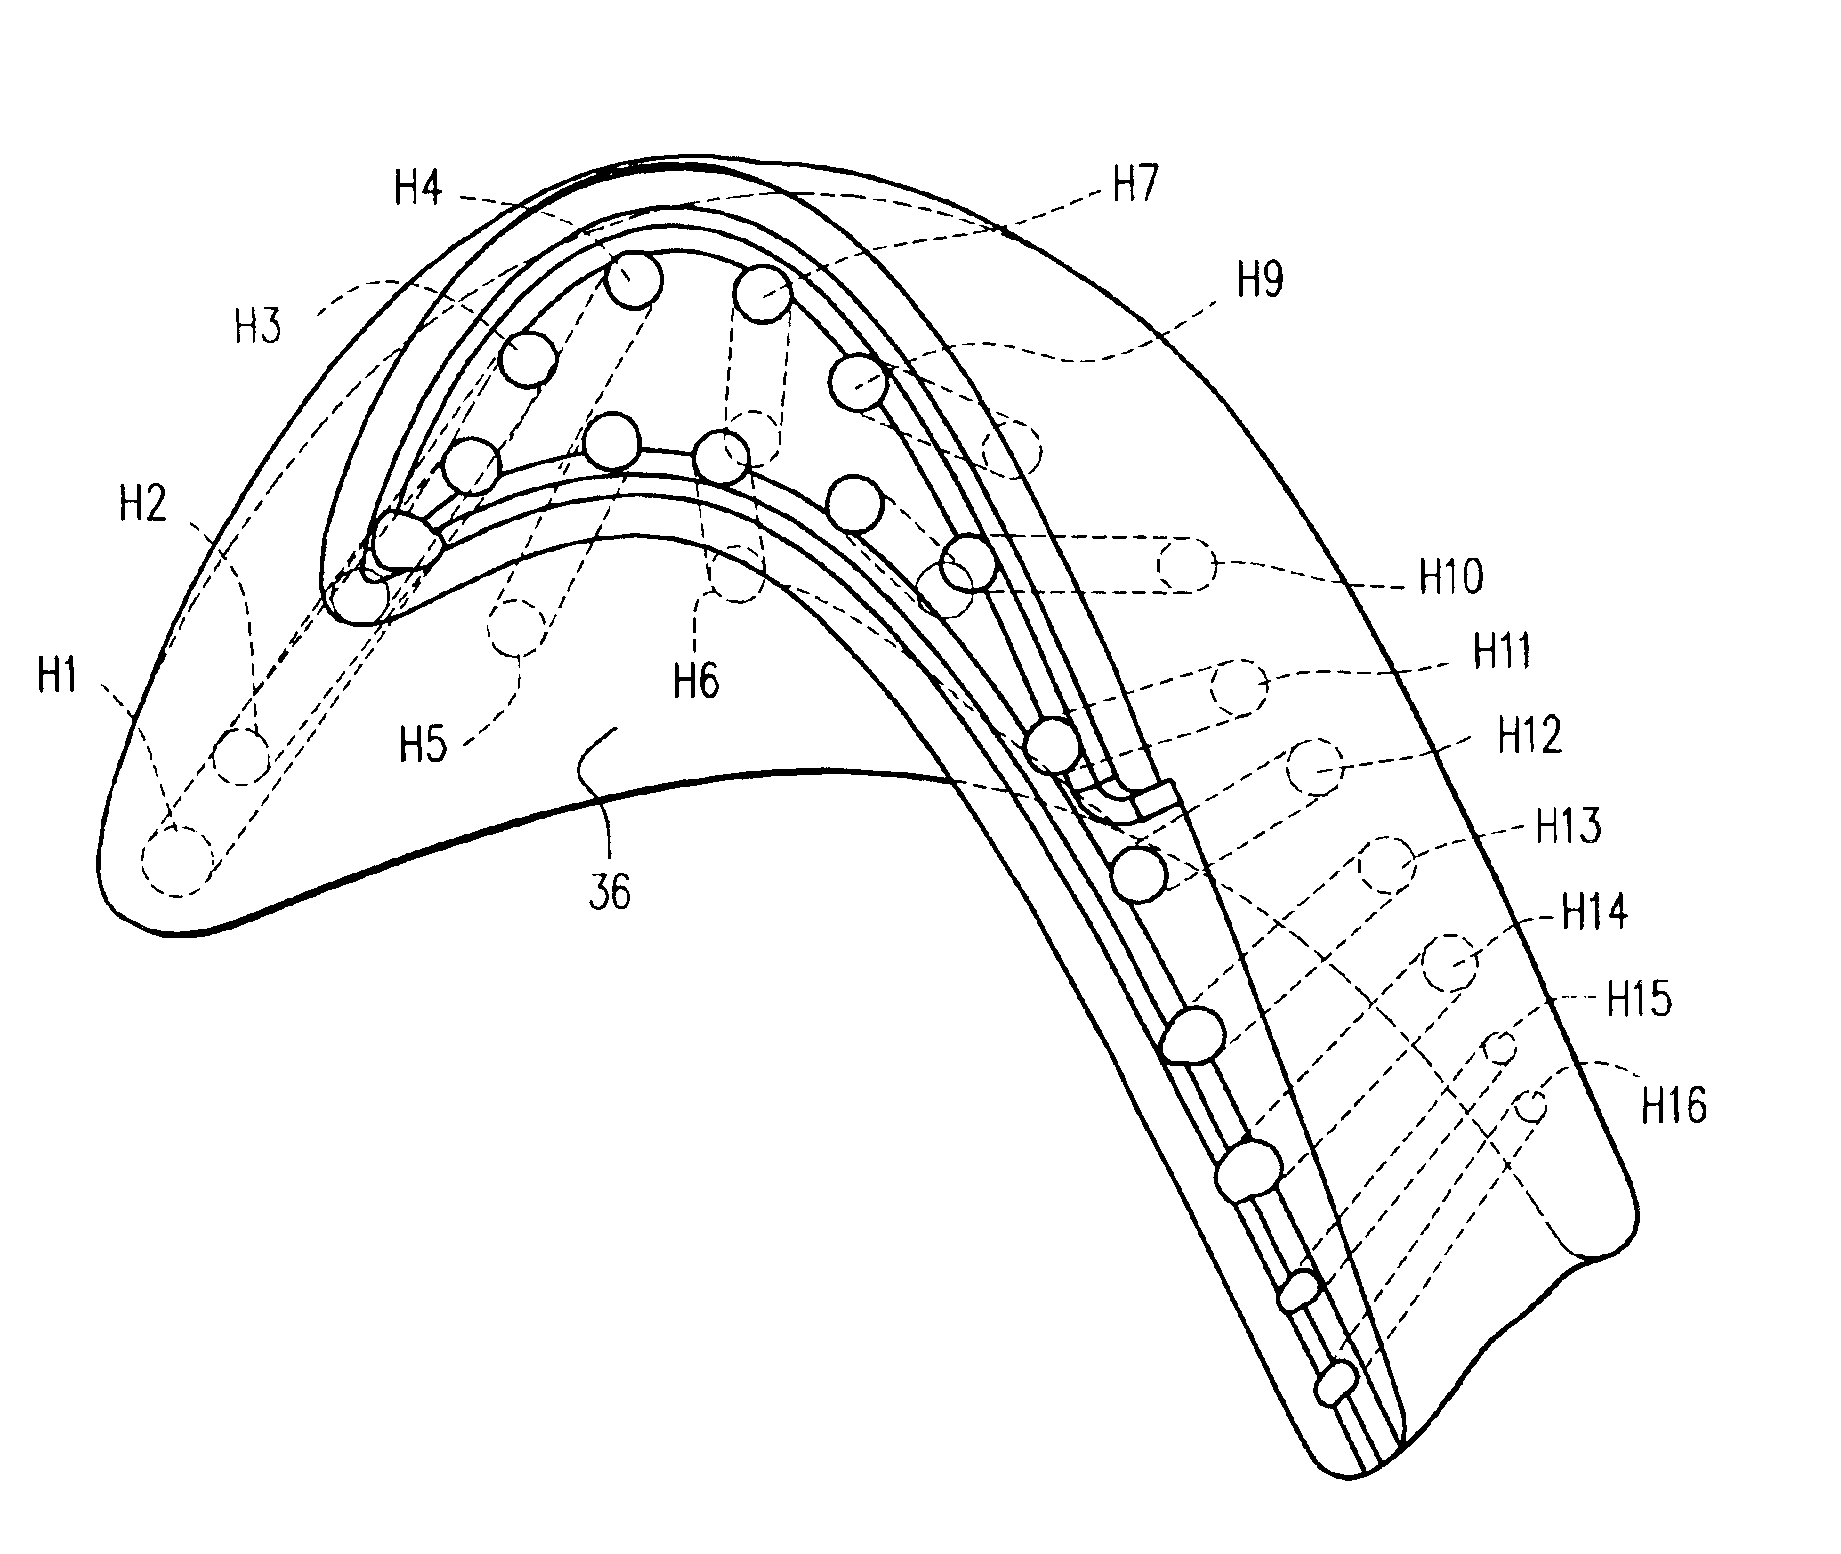 Perimeter-cooled turbine bucket airfoil cooling hole location, style and configuration